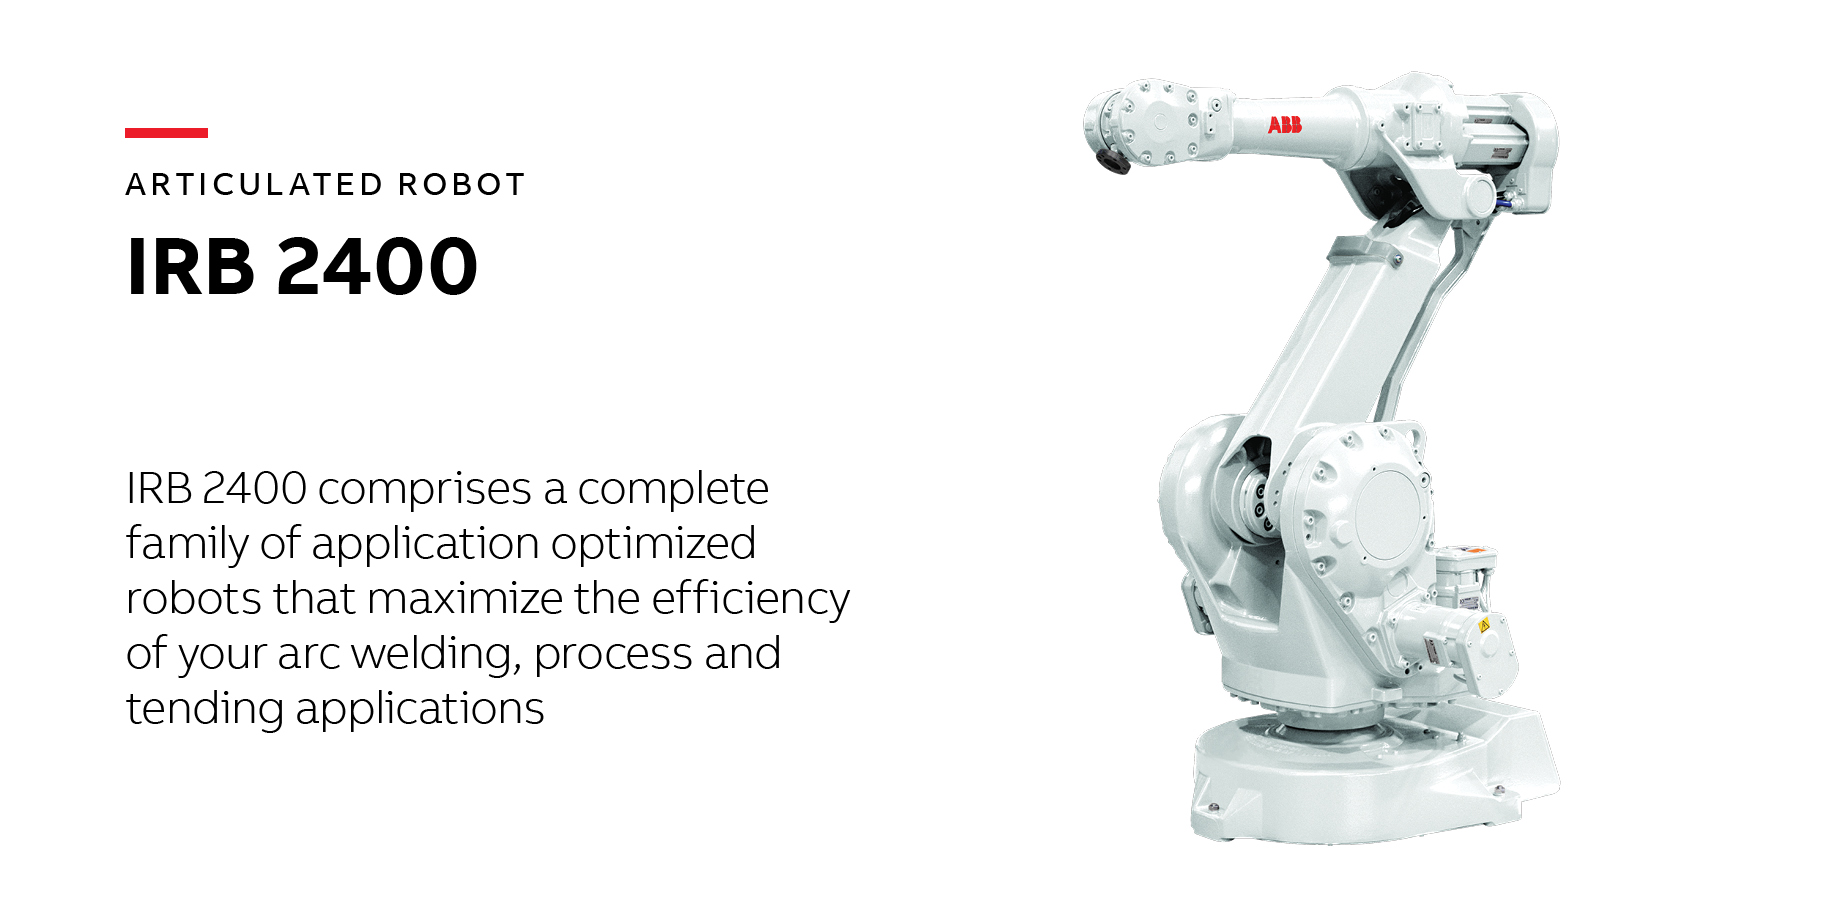 Kritisk Anvendelig Narabar ABB Robotics on Twitter: "The compact design of the IRB 2400 ensures ease  of installation. The robust construction and use of minimum parts  contribute to high reliability and long intervals between maintenance.